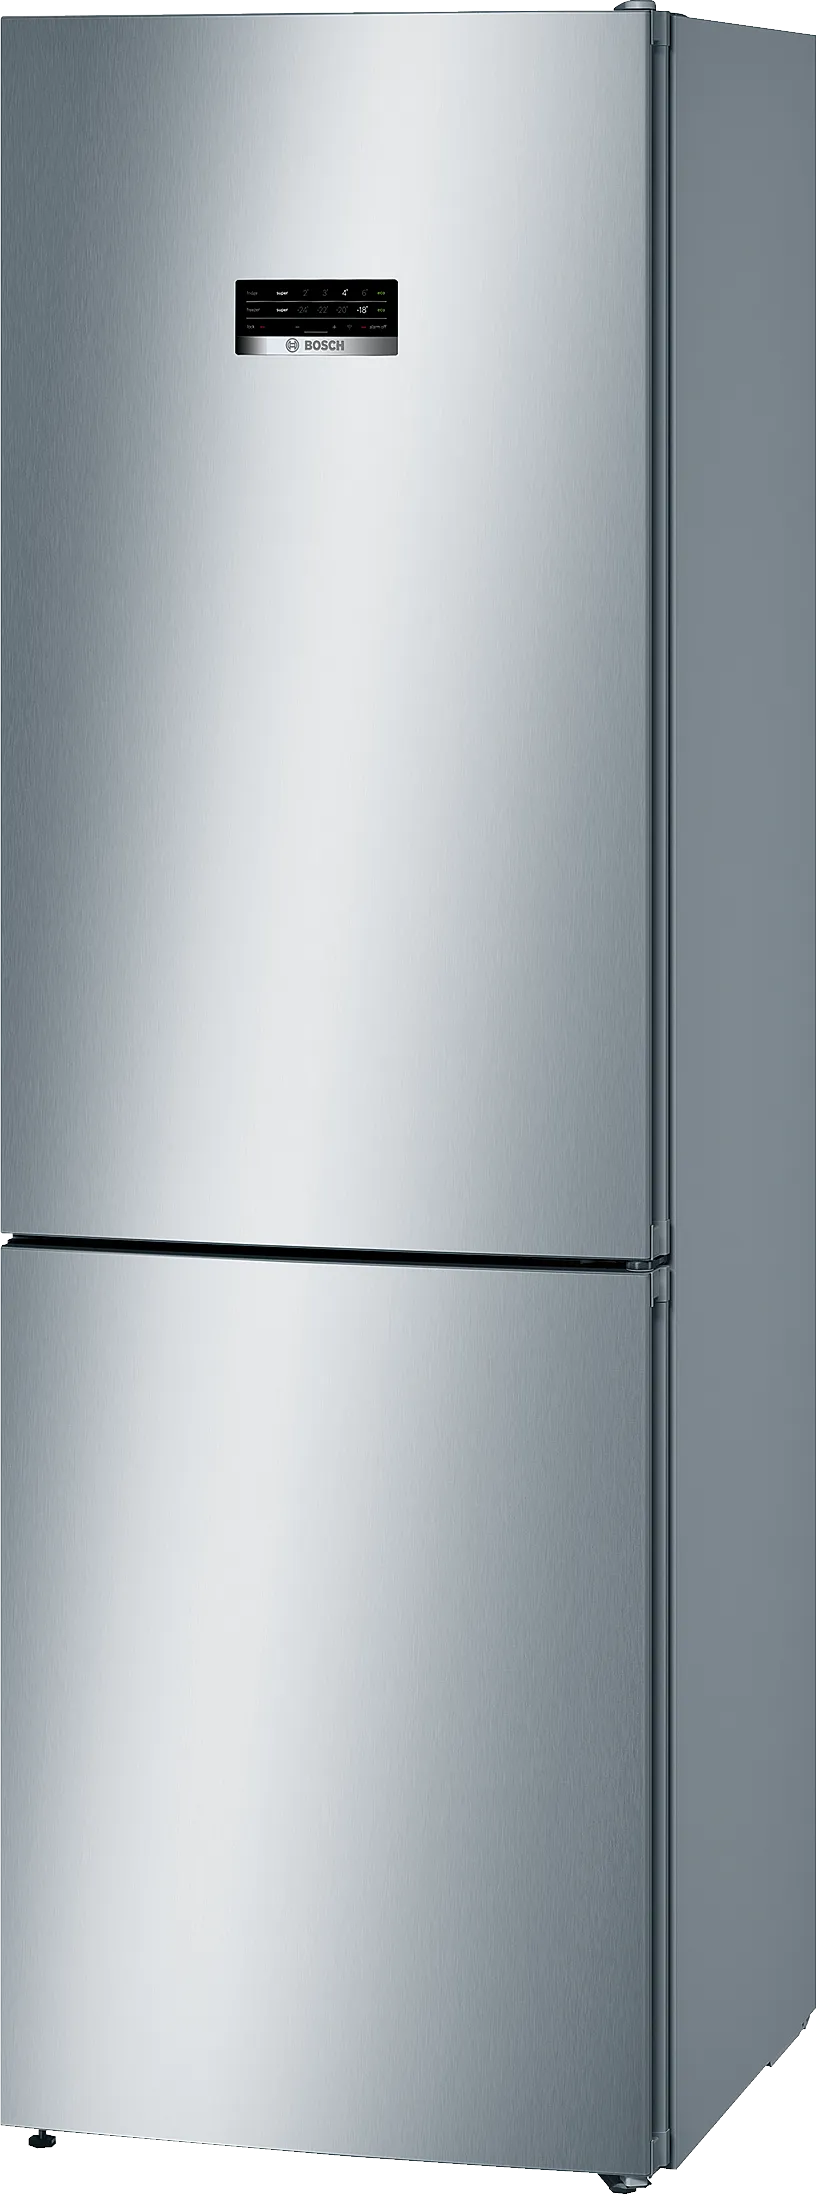 Series 4 free-standing fridge-freezer with freezer at bottom 186 x 60 cm Stainless steel look 